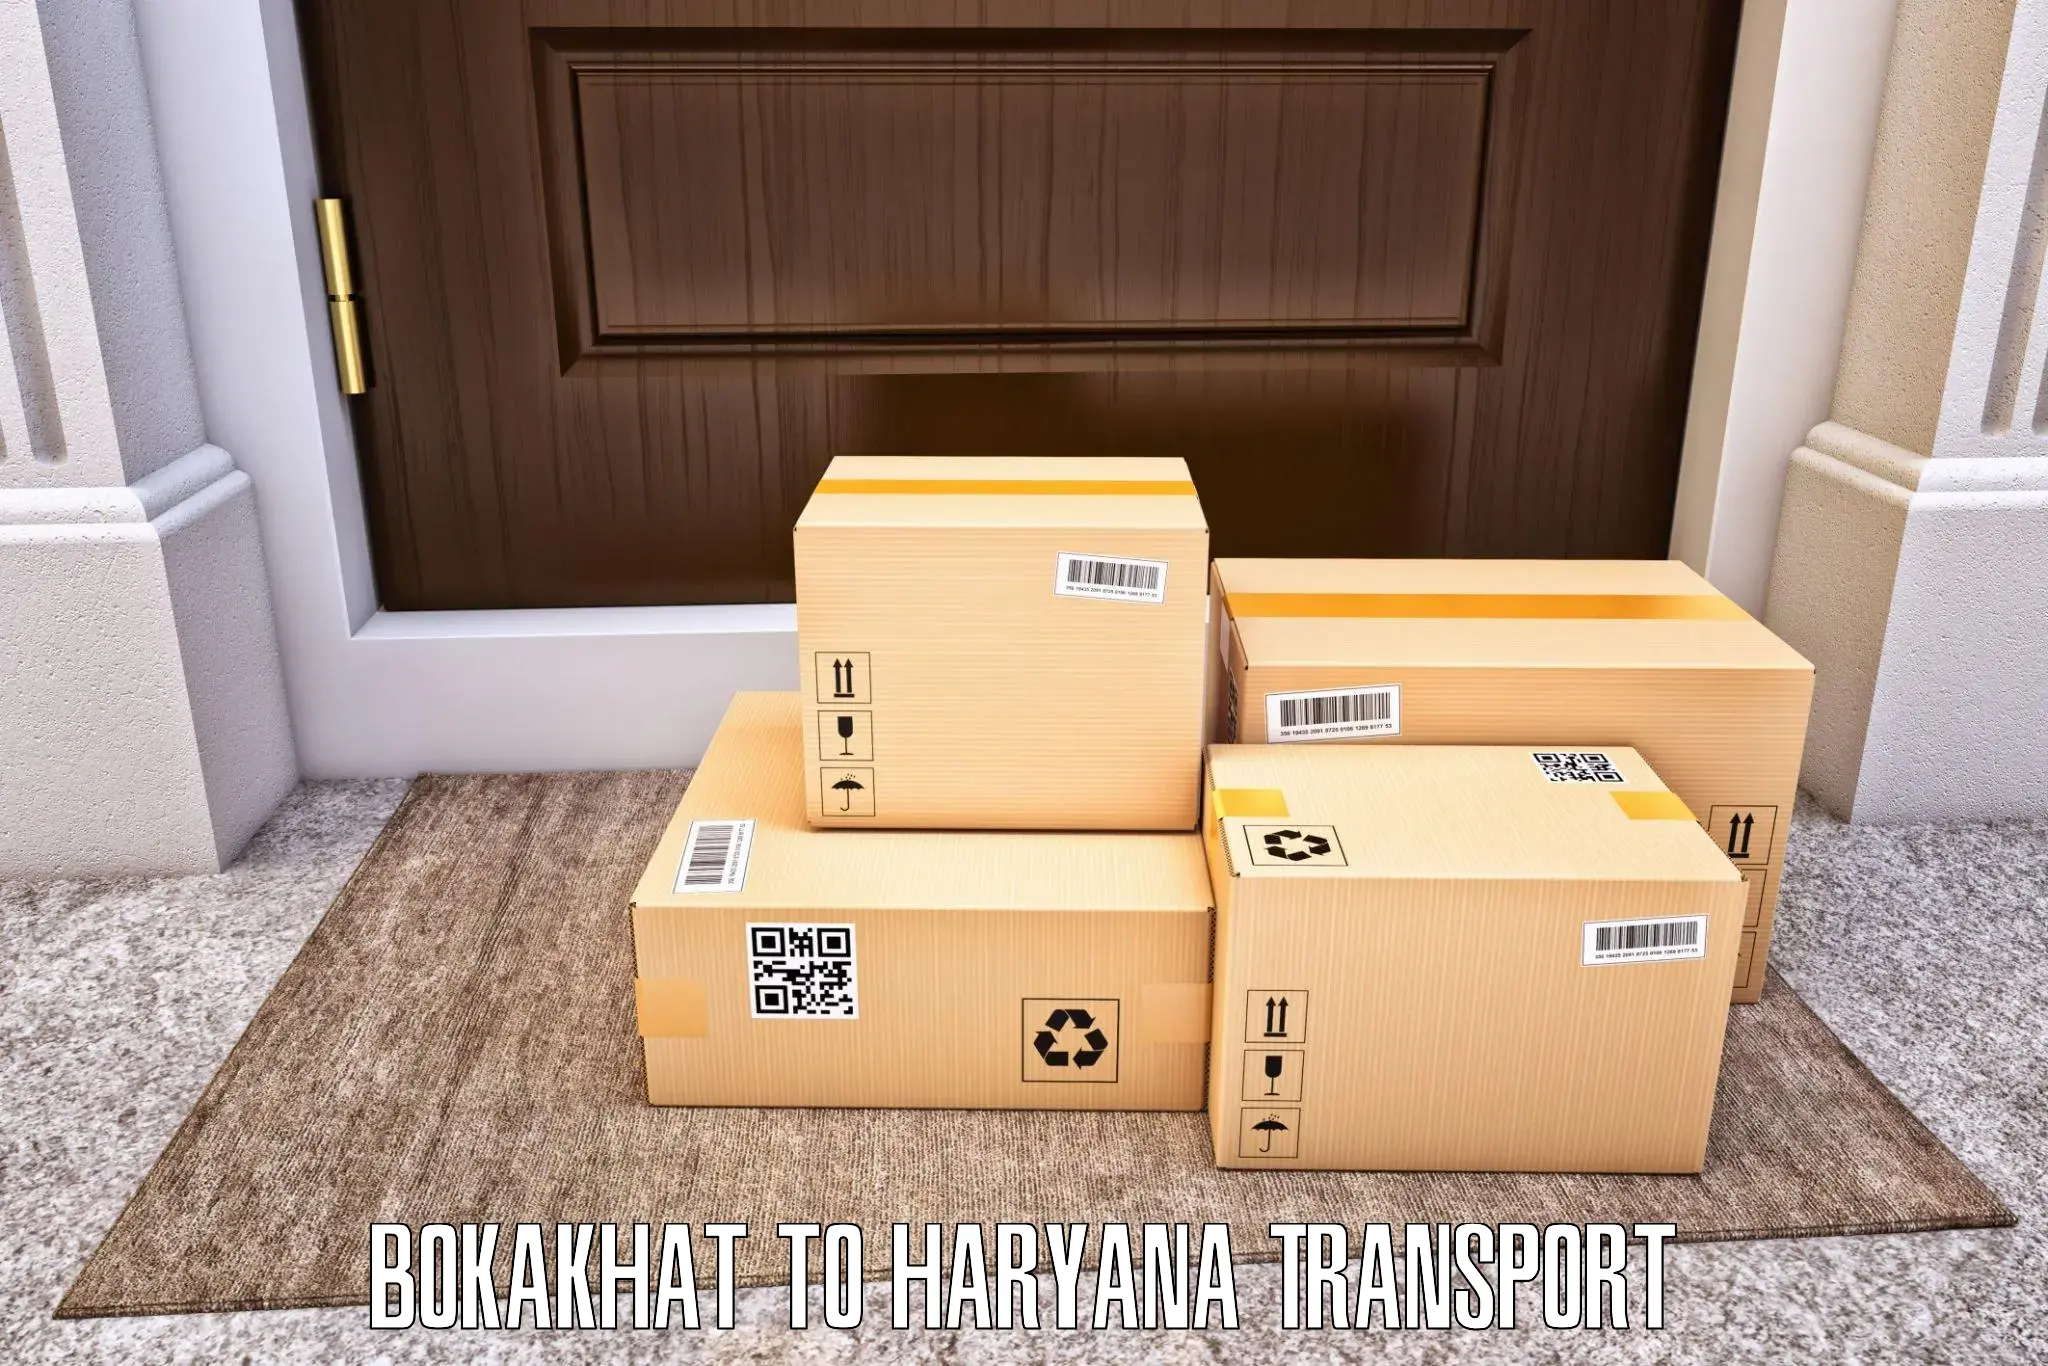 Air freight transport services Bokakhat to Chaudhary Charan Singh Haryana Agricultural University Hisar